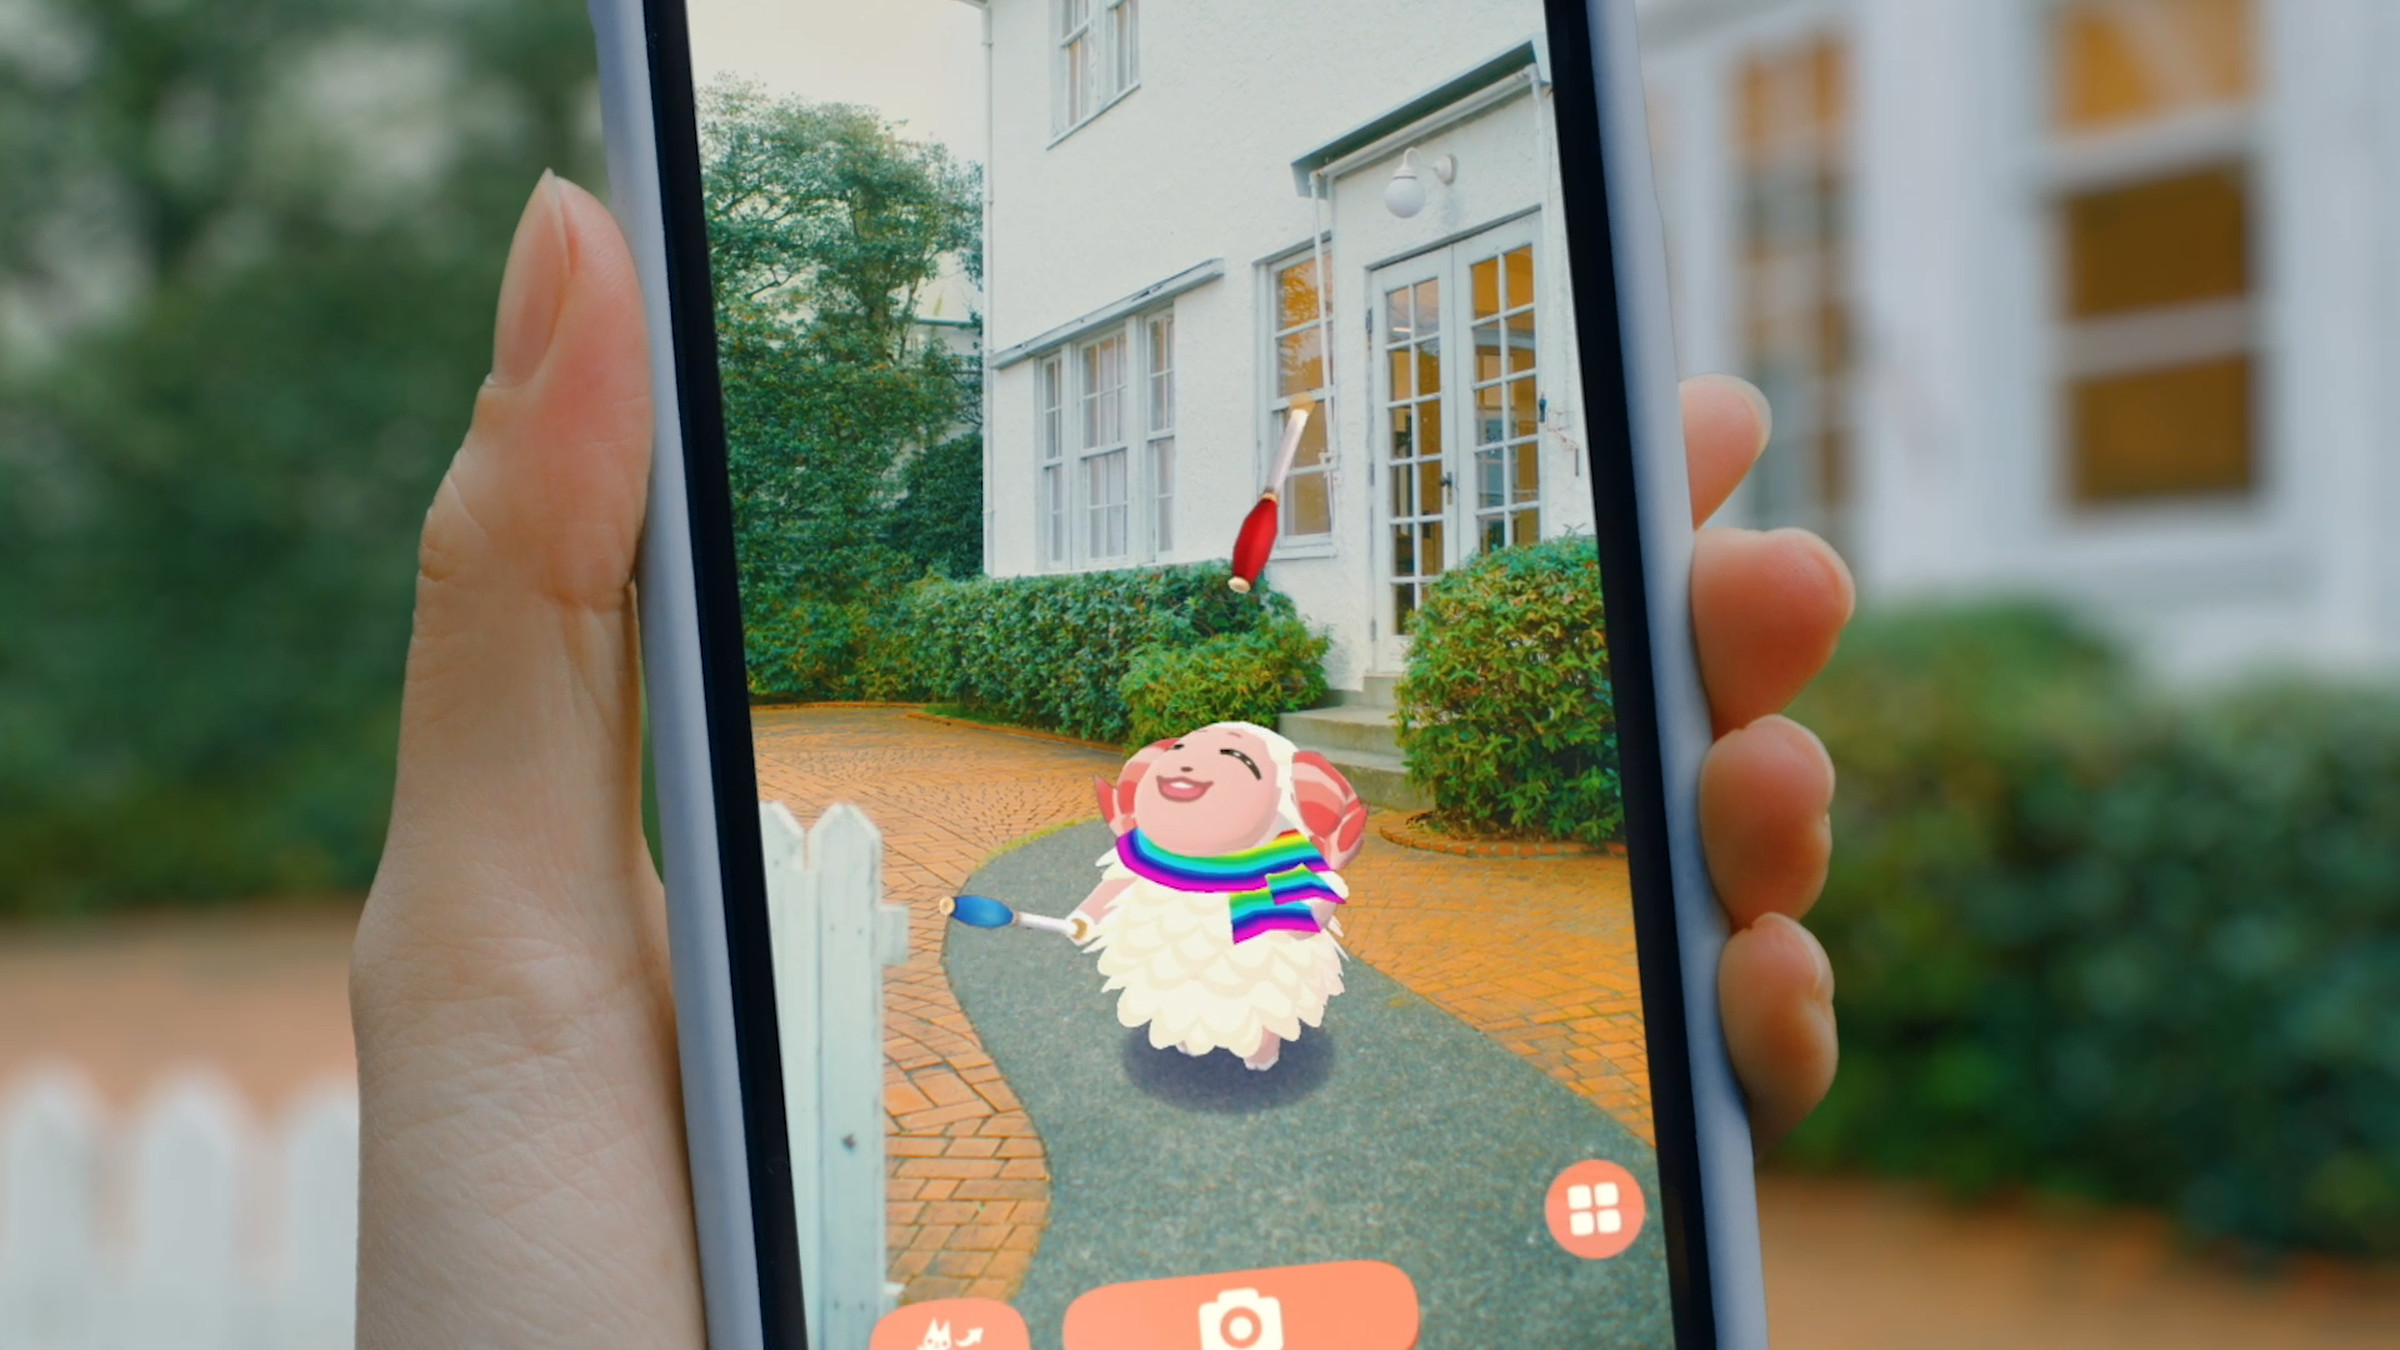 While AR Camera lets you place objects and characters from the game in the real world. 